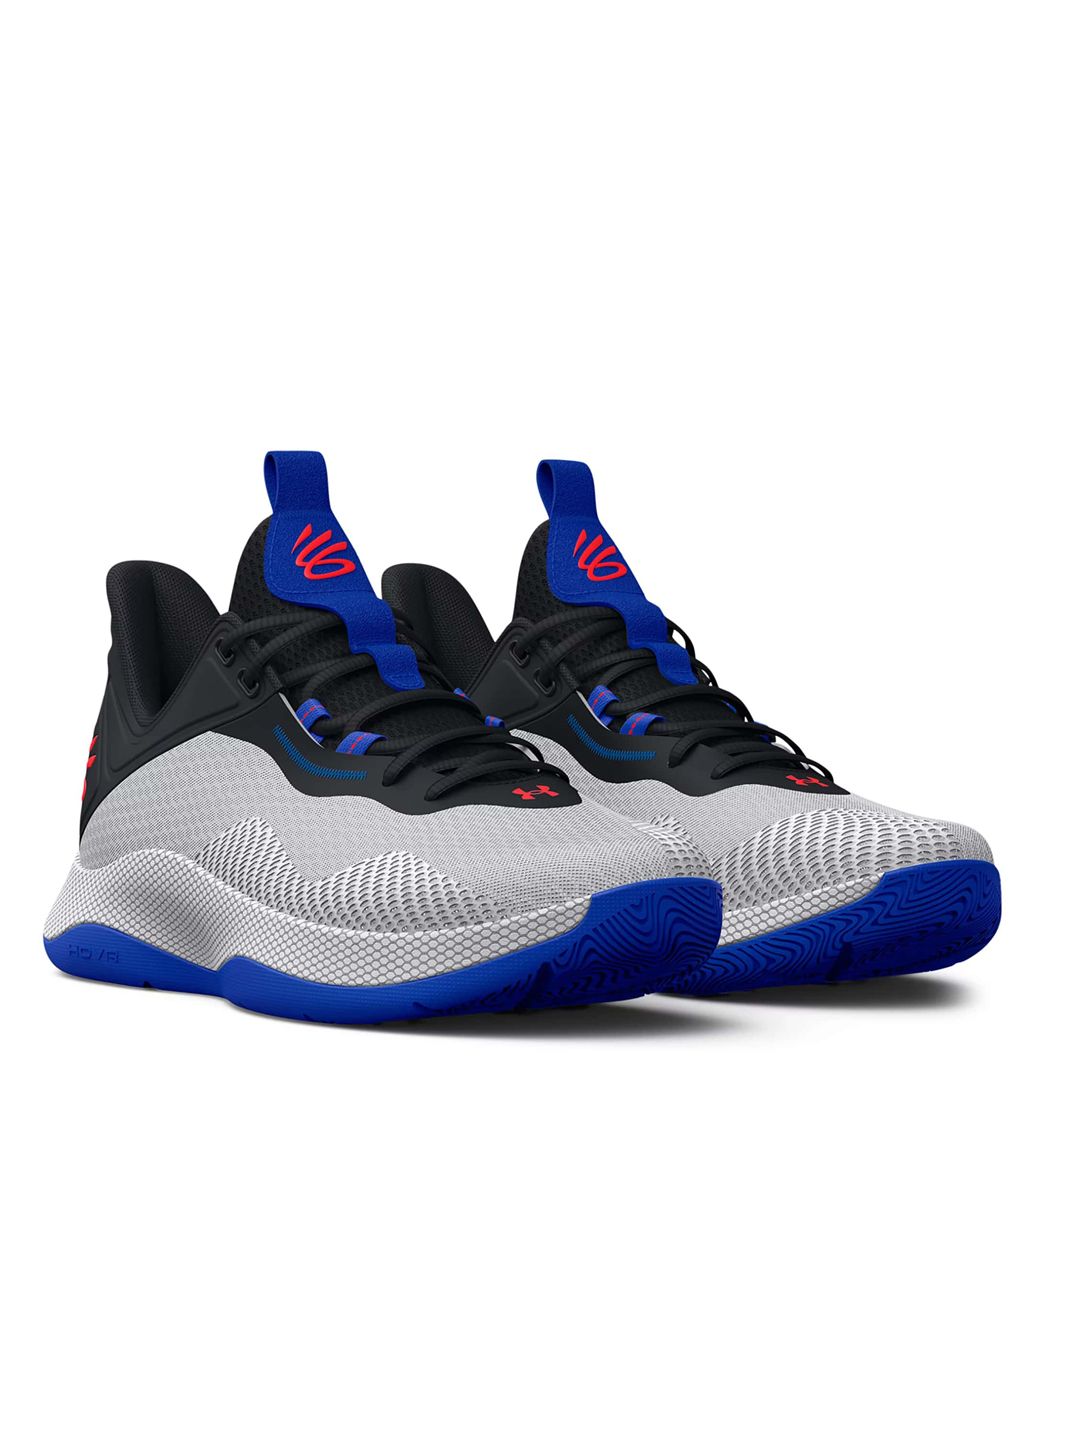 UNDER ARMOUR Unisex Woven Design Curry HOVR Splash 2 Basketball Shoes Price in India